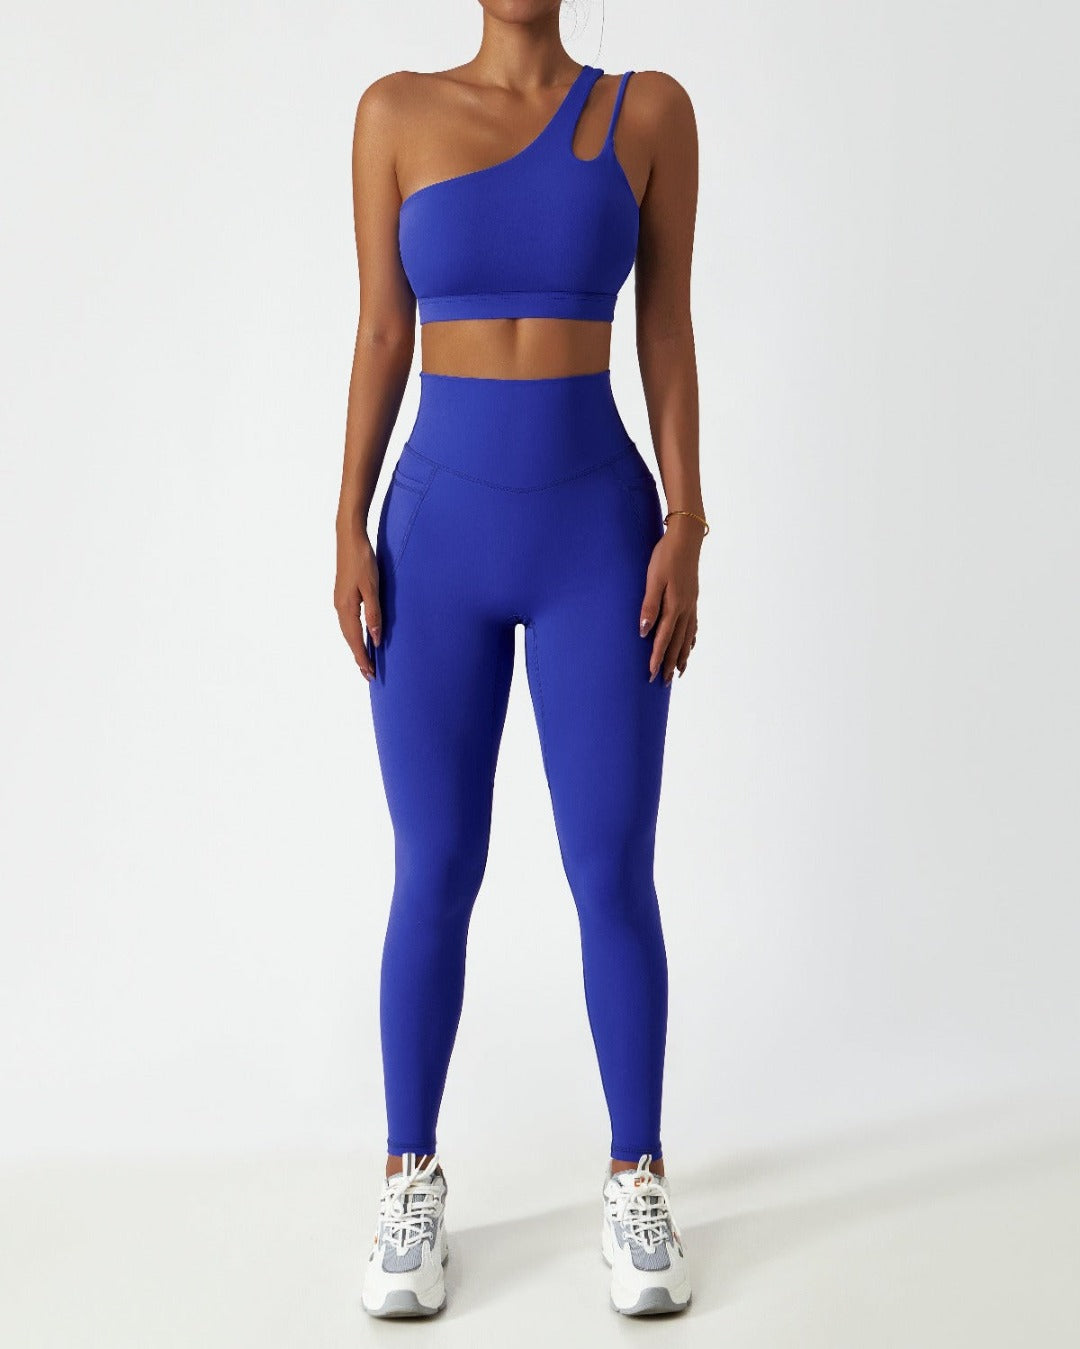 Klein Blue Buttery Smooth Leggings